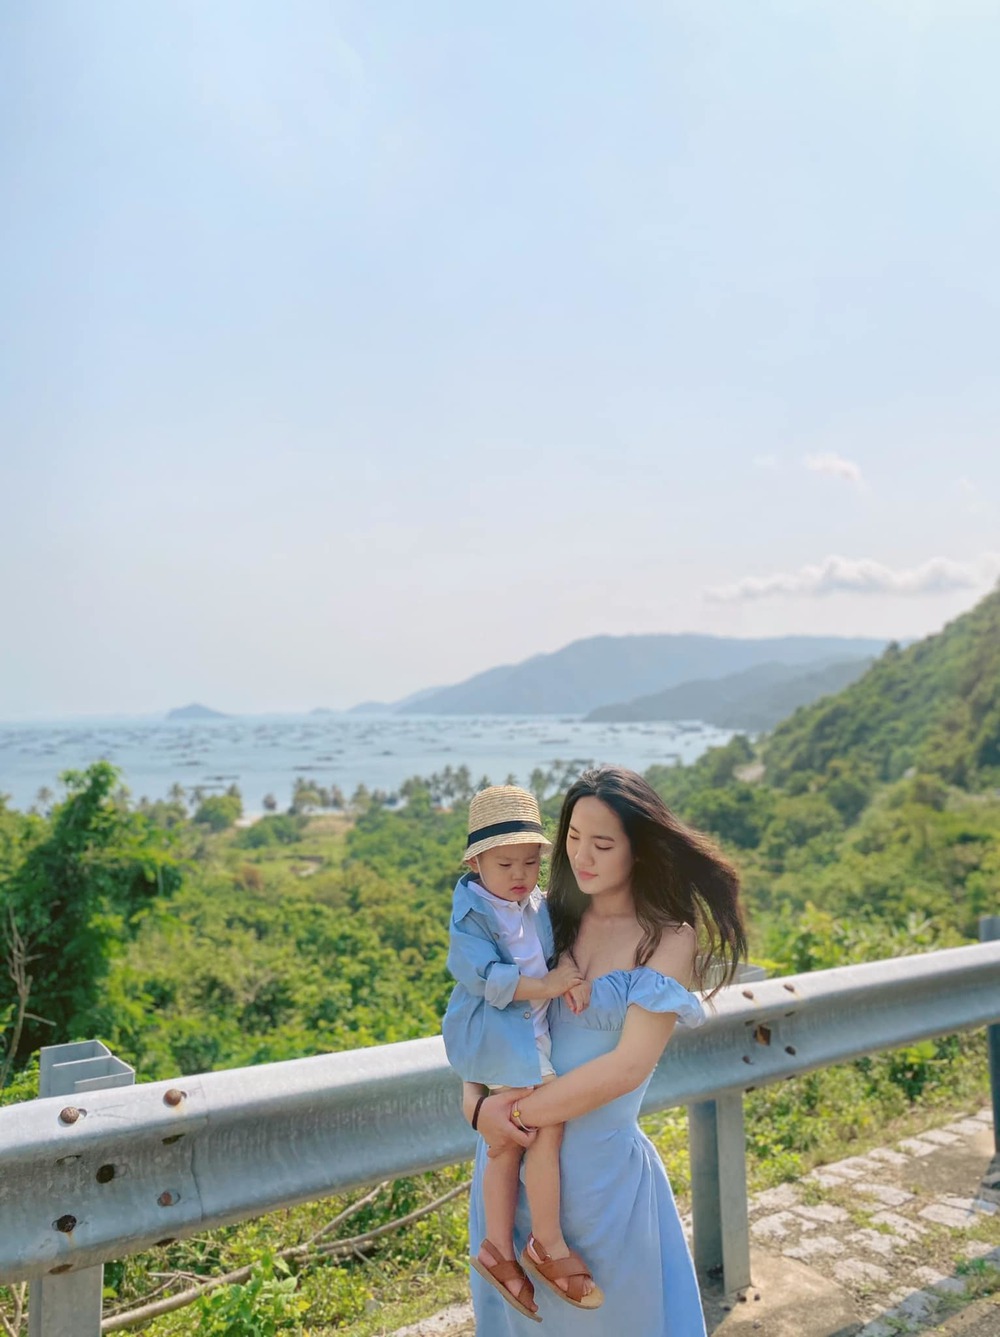 Sharing a travel guide for young children, the young mother received a 